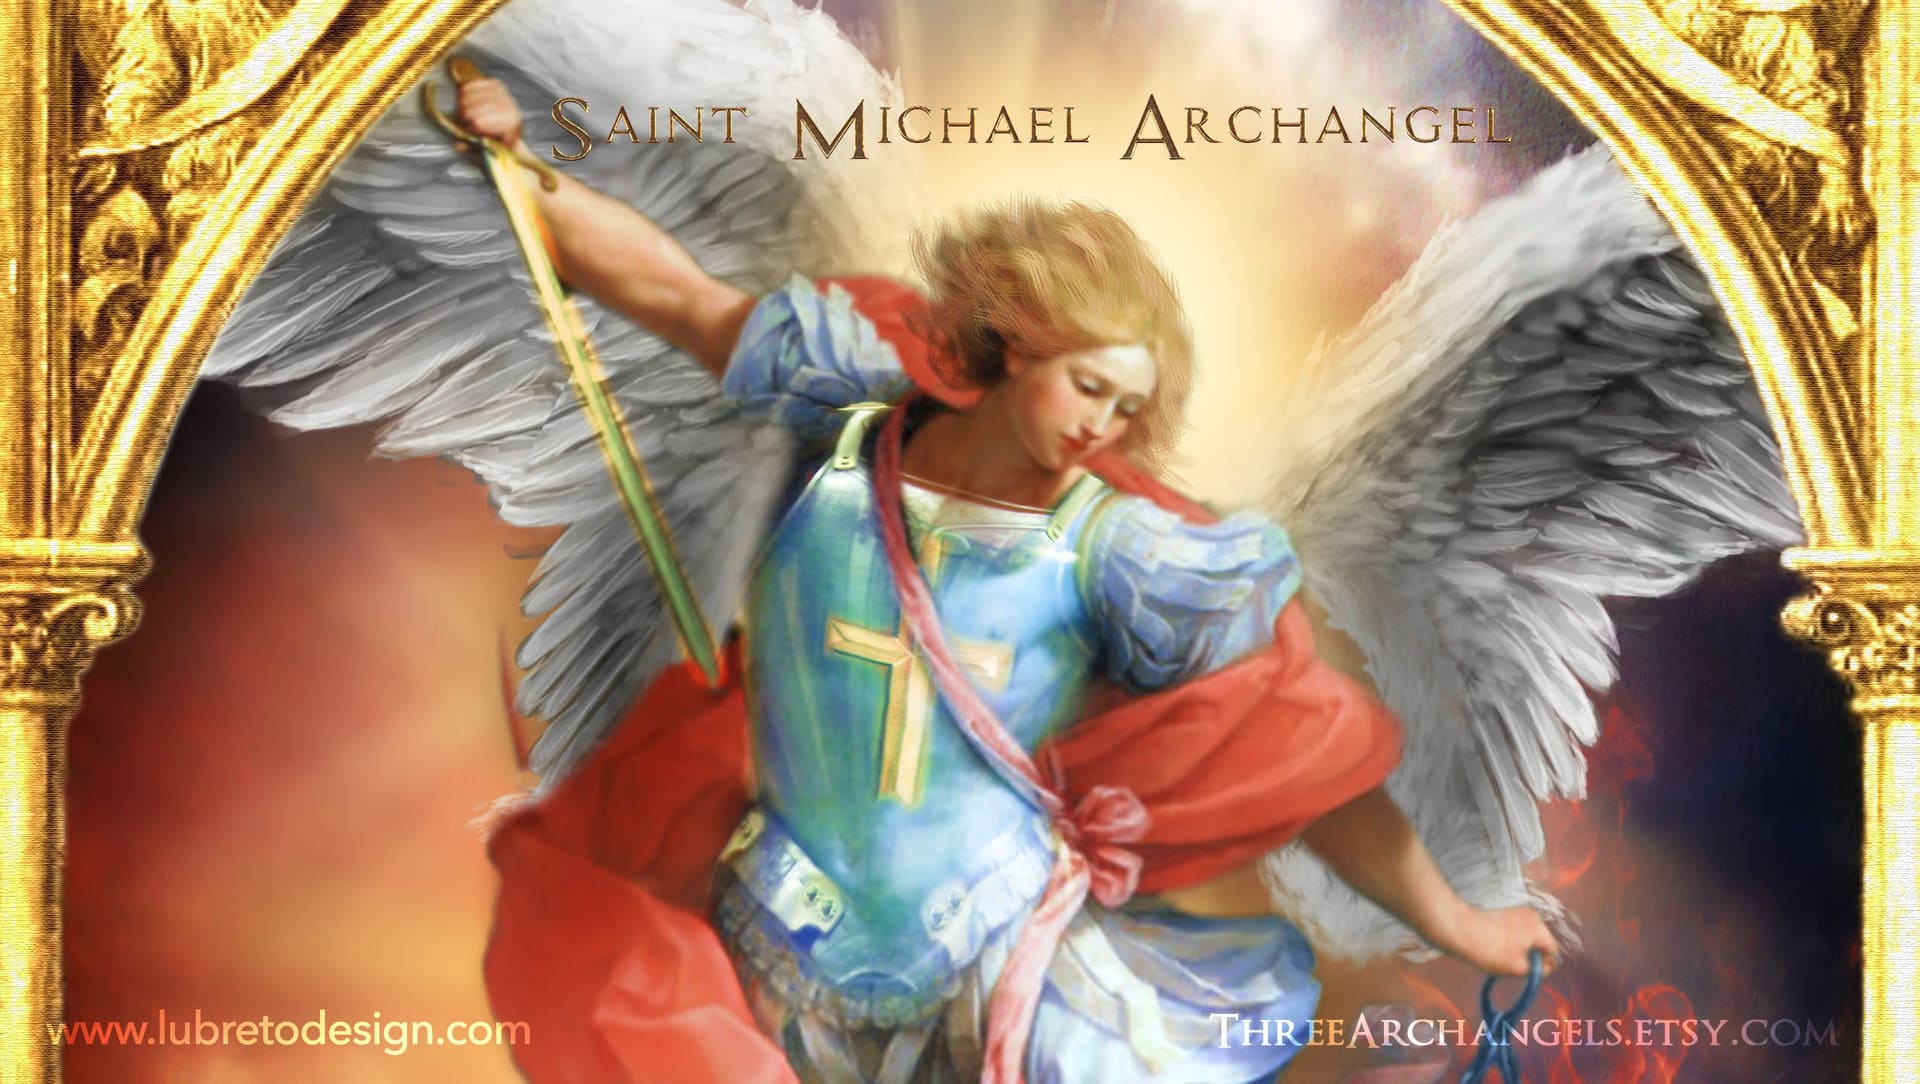 5 Free Hd Wallpapers From 3archangels - Catholic Saint Michael - HD Wallpaper 